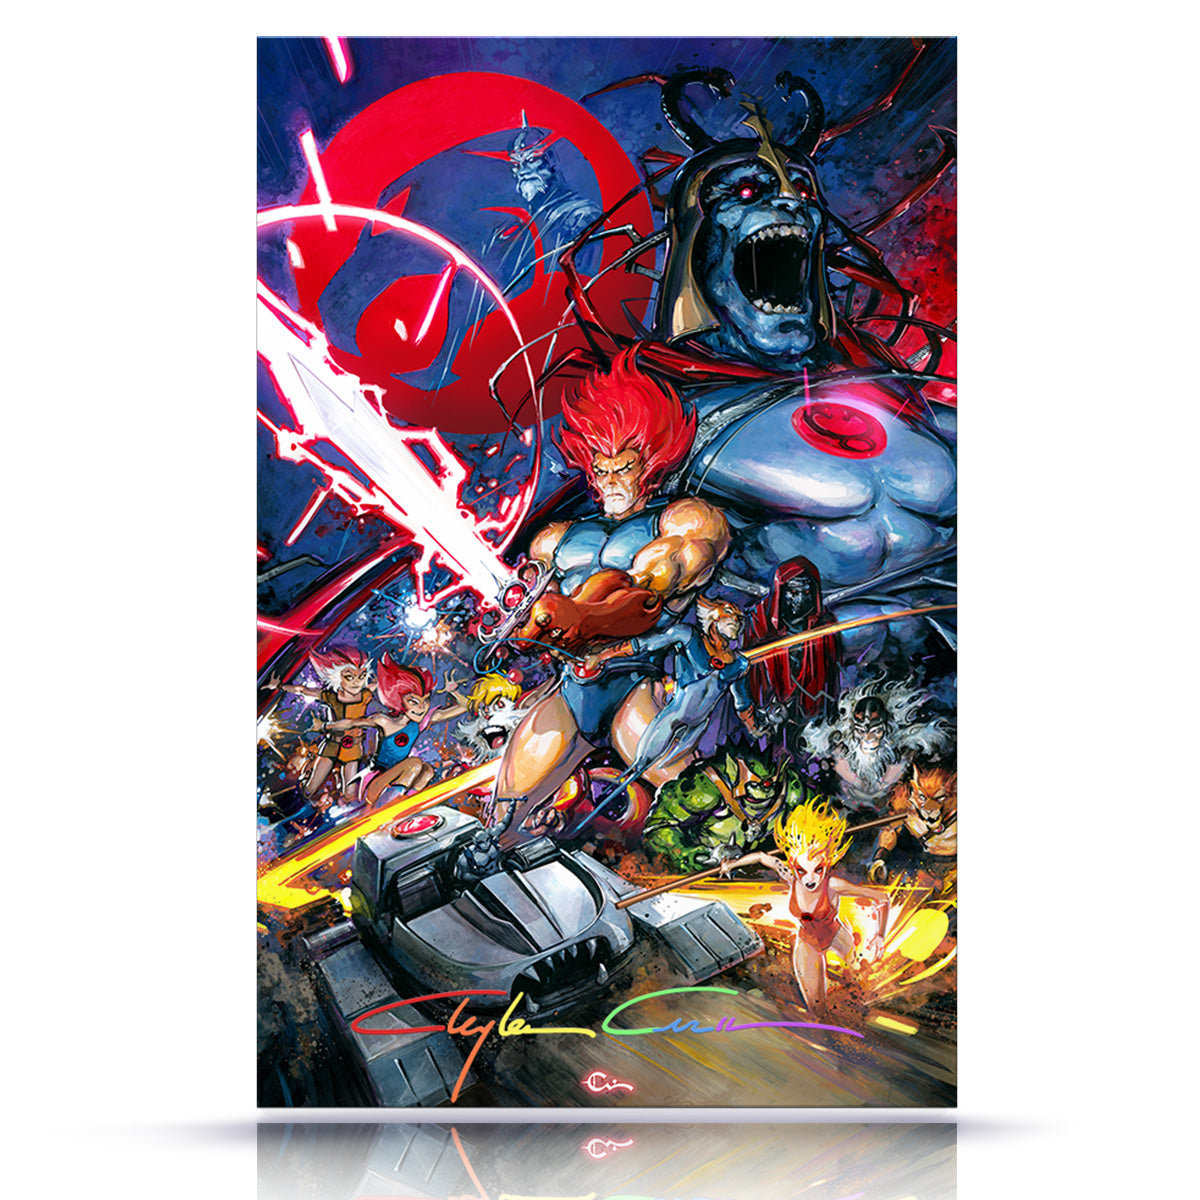 PreOrder: Infinity Signature Thundercats #1 Virgin Variant Limited to ...